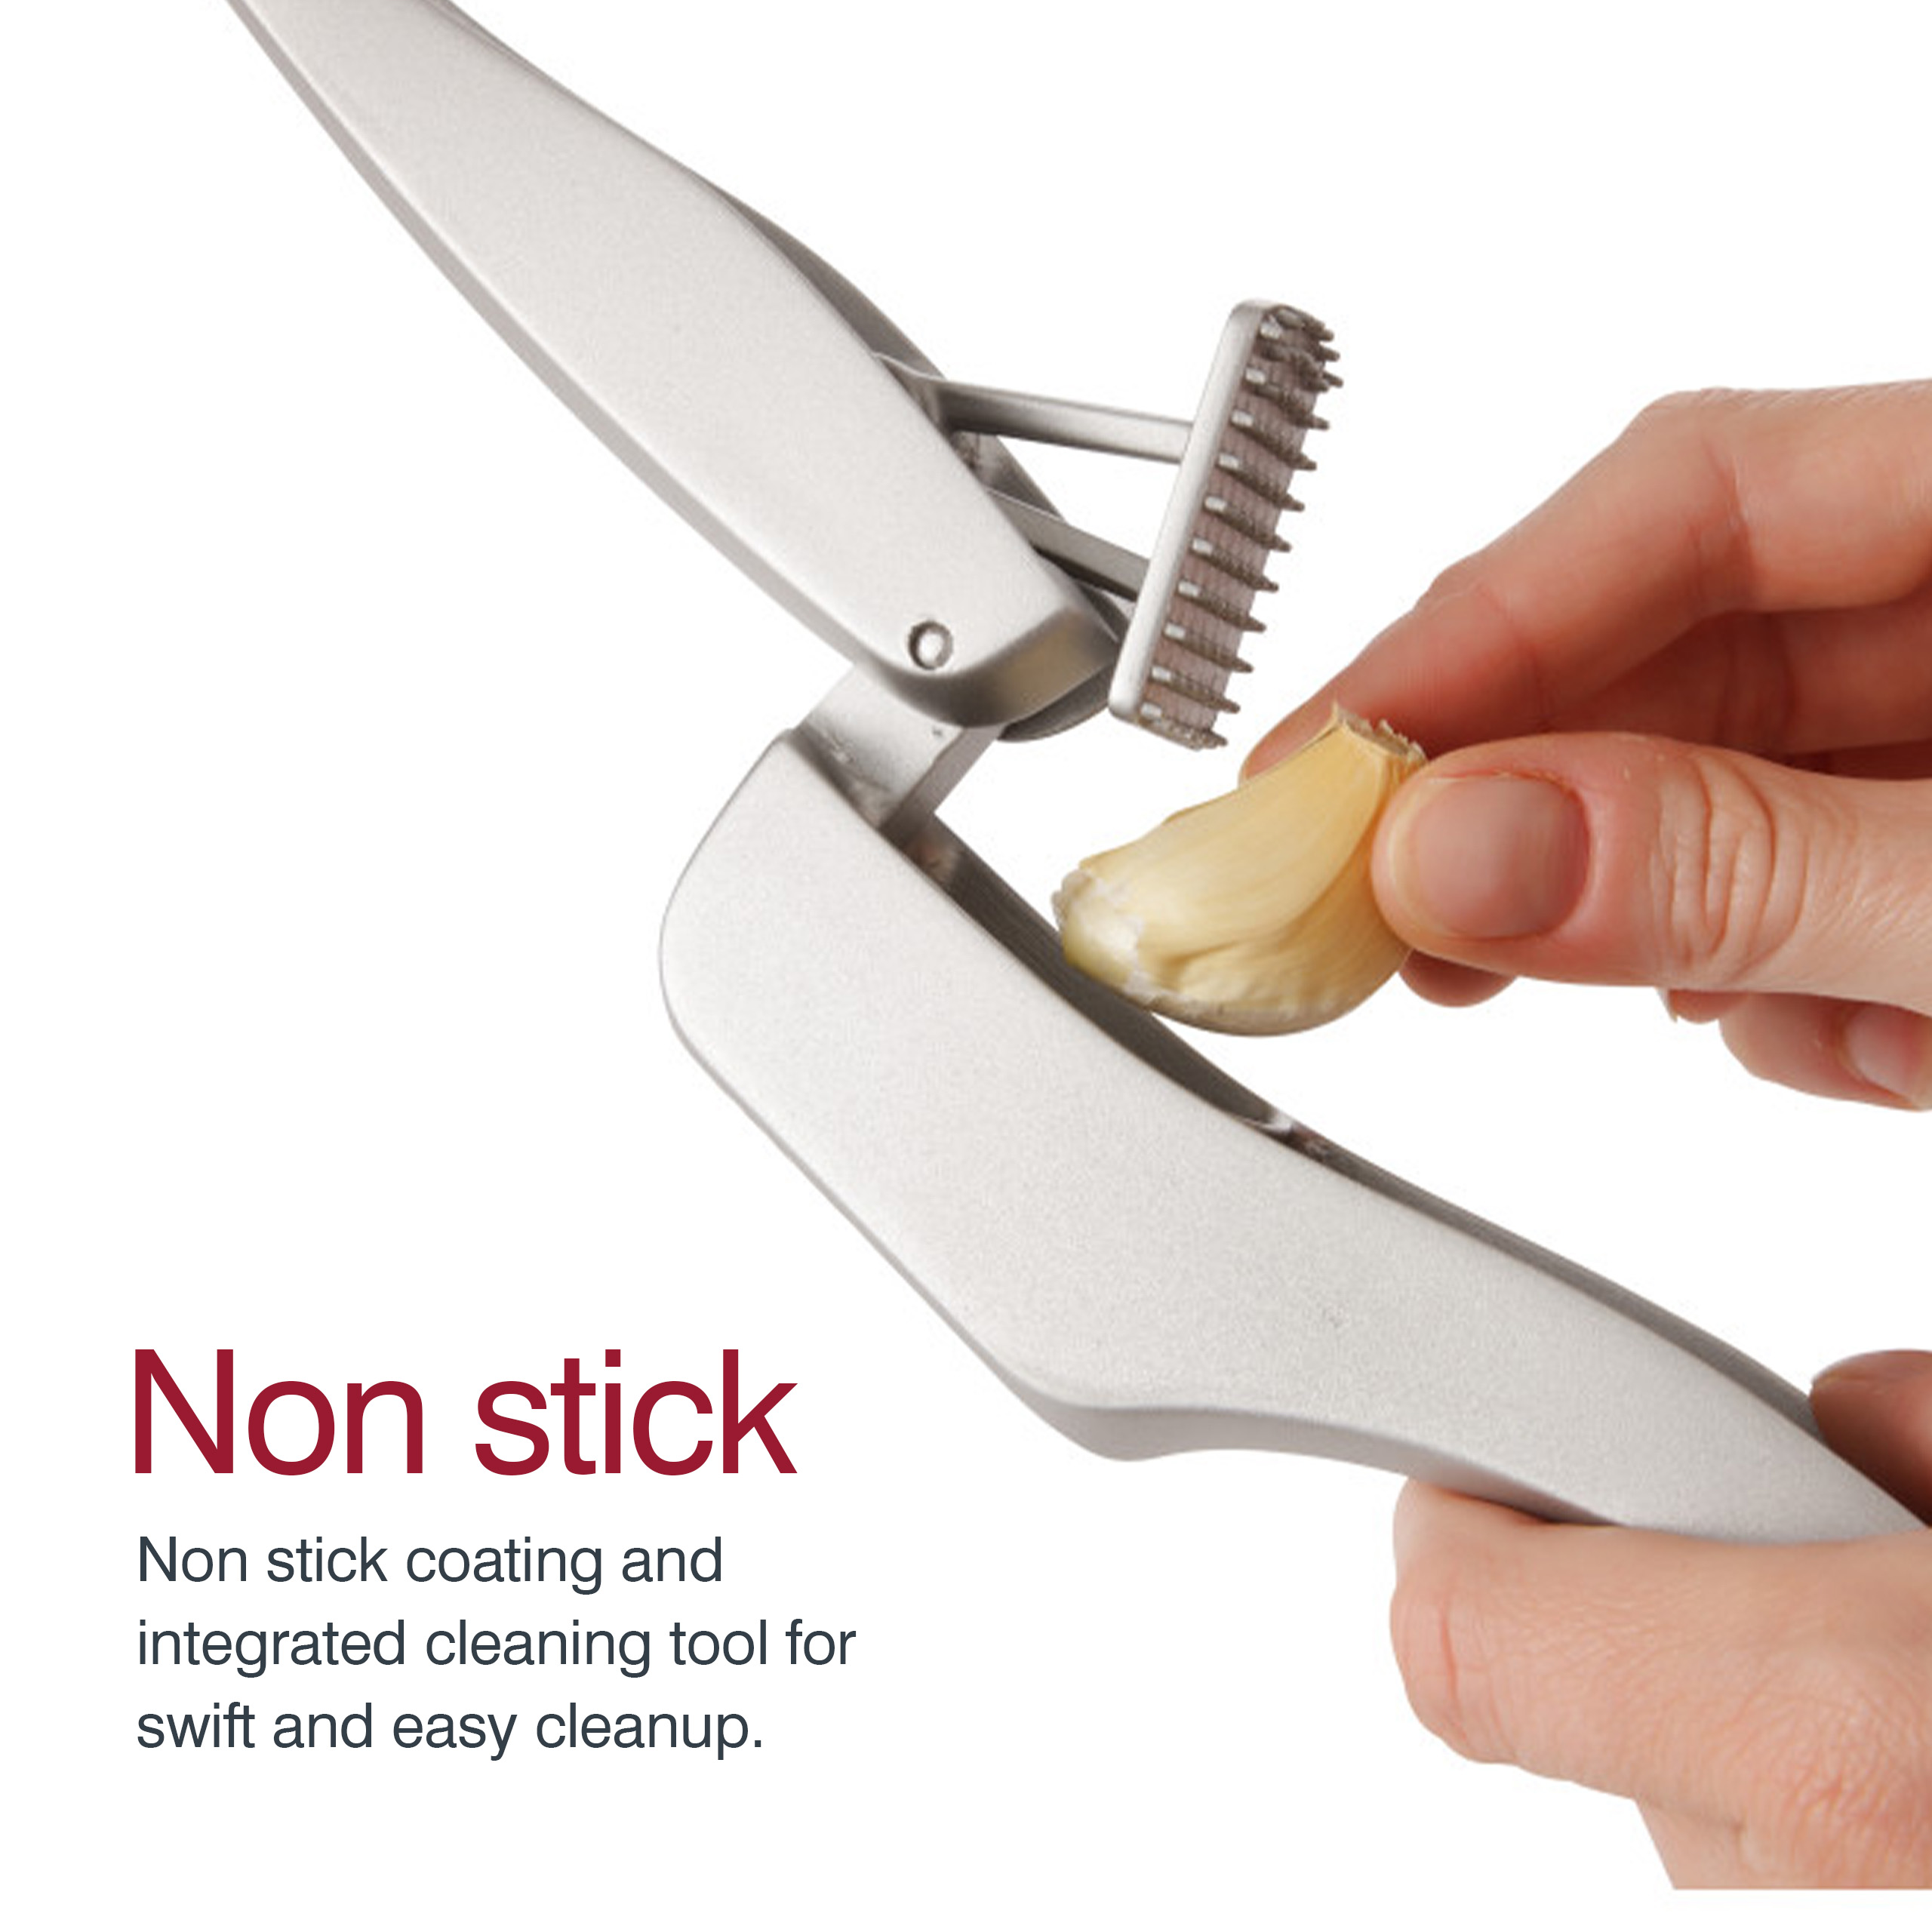 Zyliss Susi 3 Garlic Press Built in Cleaner - Crush, Mince and Peeler, Silver Aluminum Dishwasher Safe - image 5 of 7